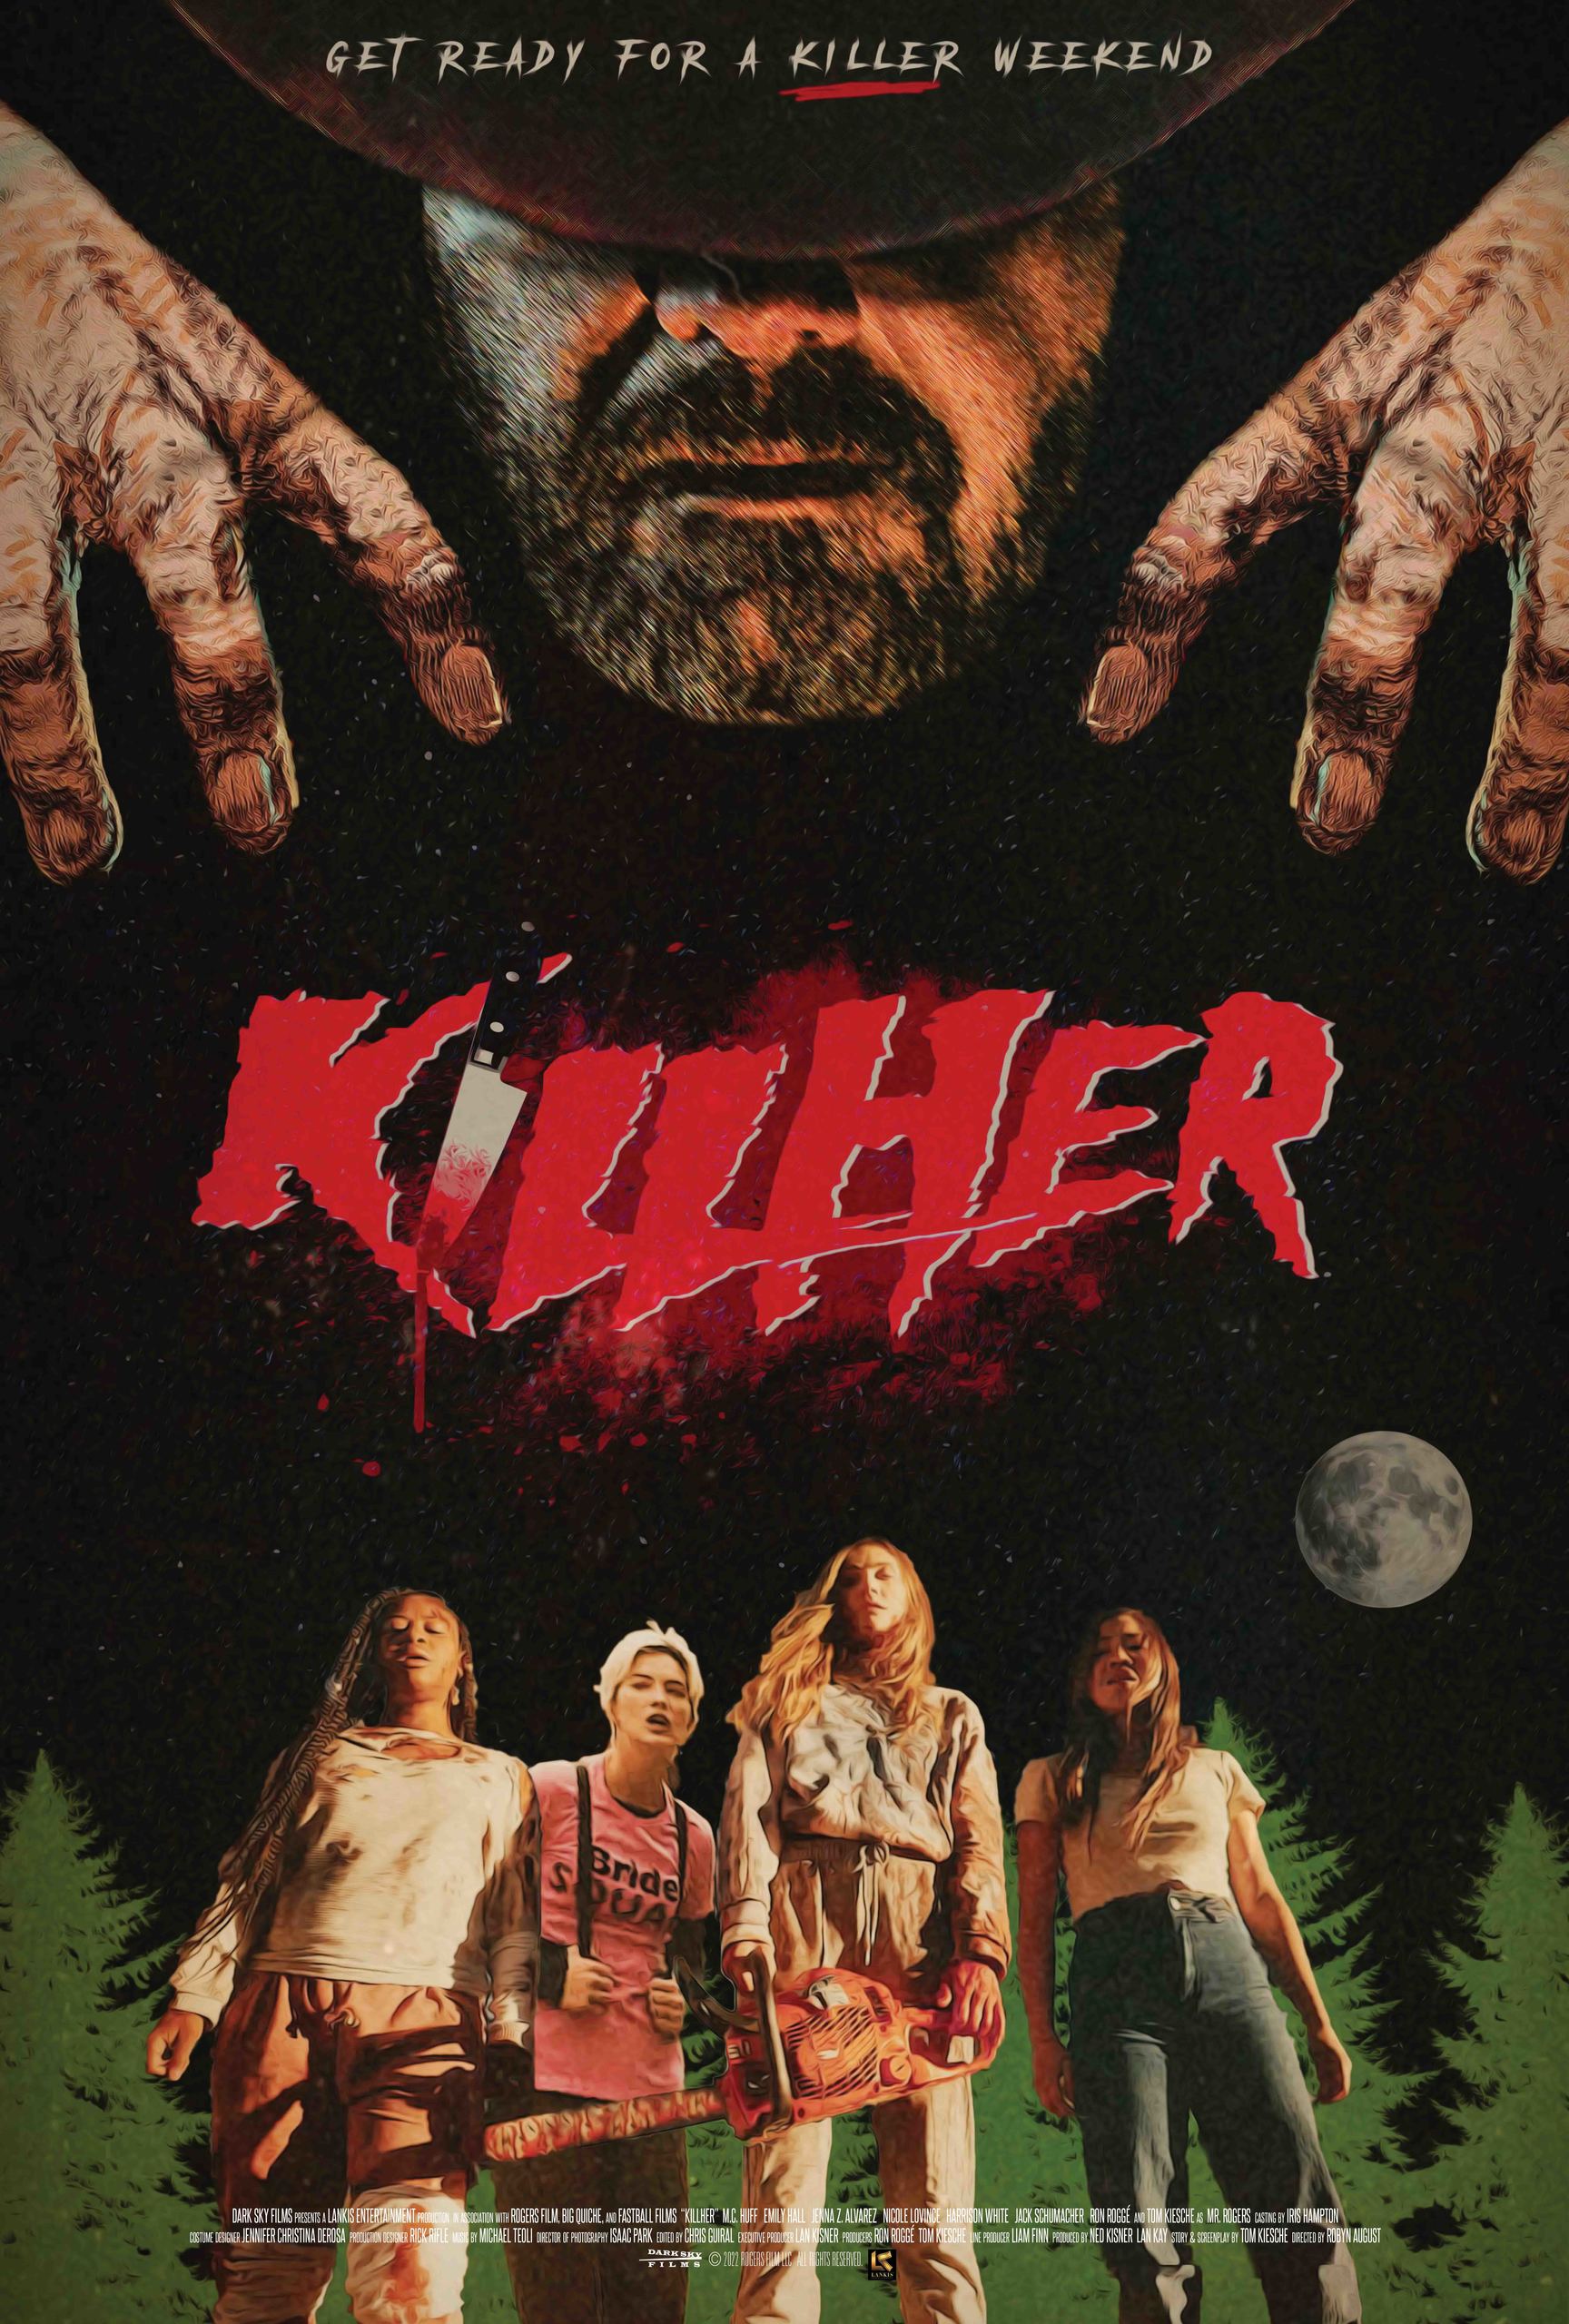 A movie poster depicting a horror film called "KillHer"